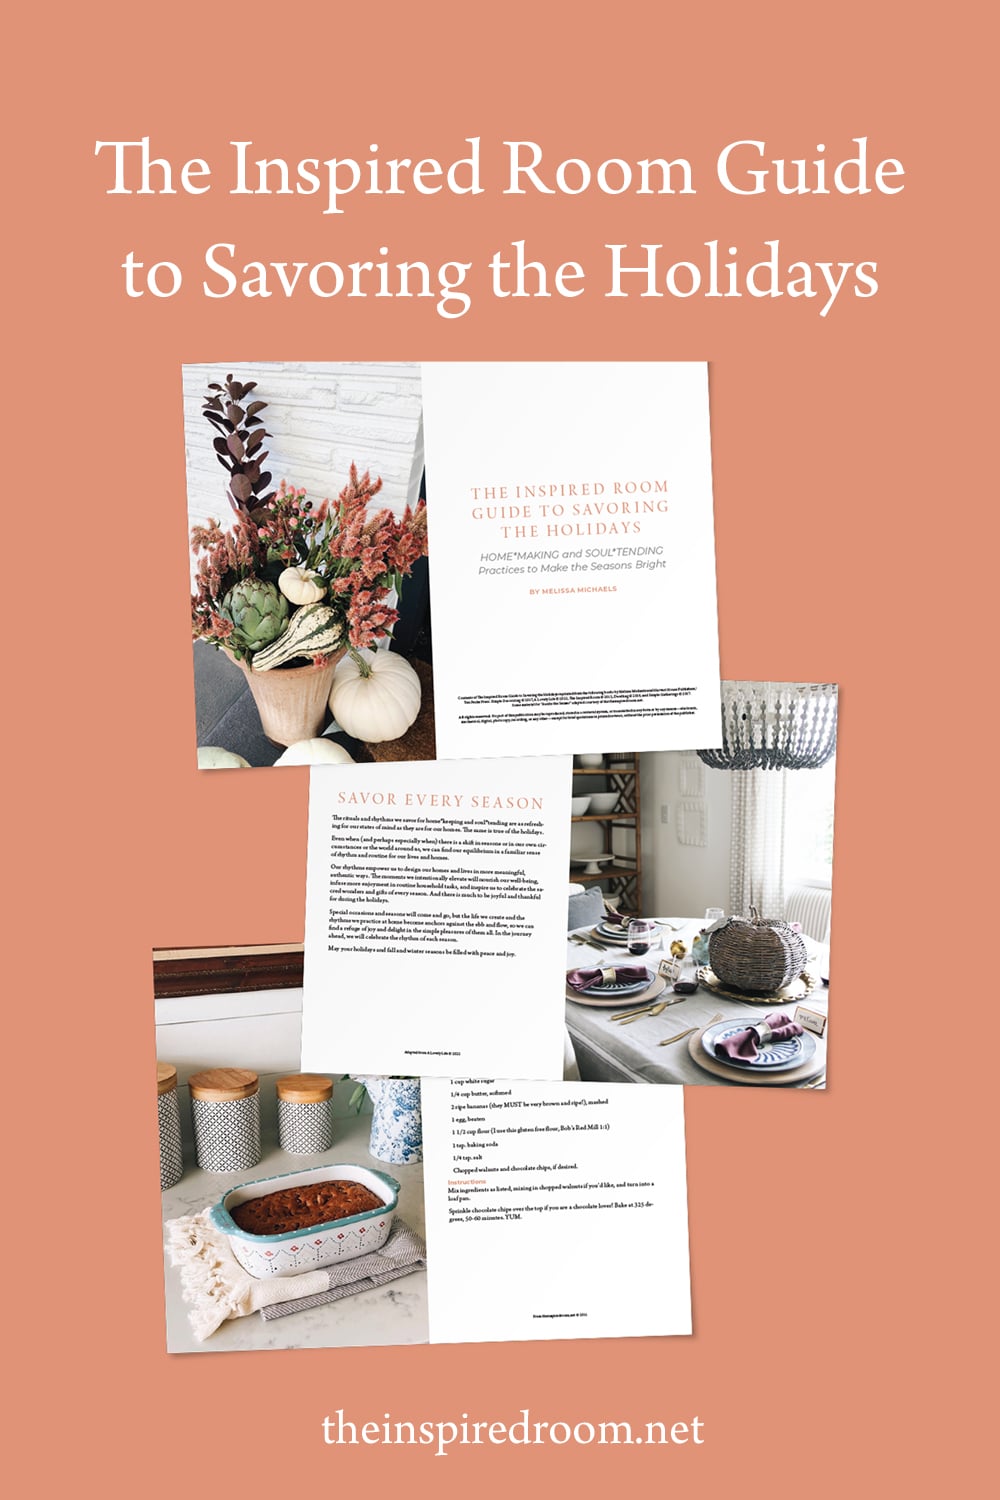 A Guide to Savoring the Holidays